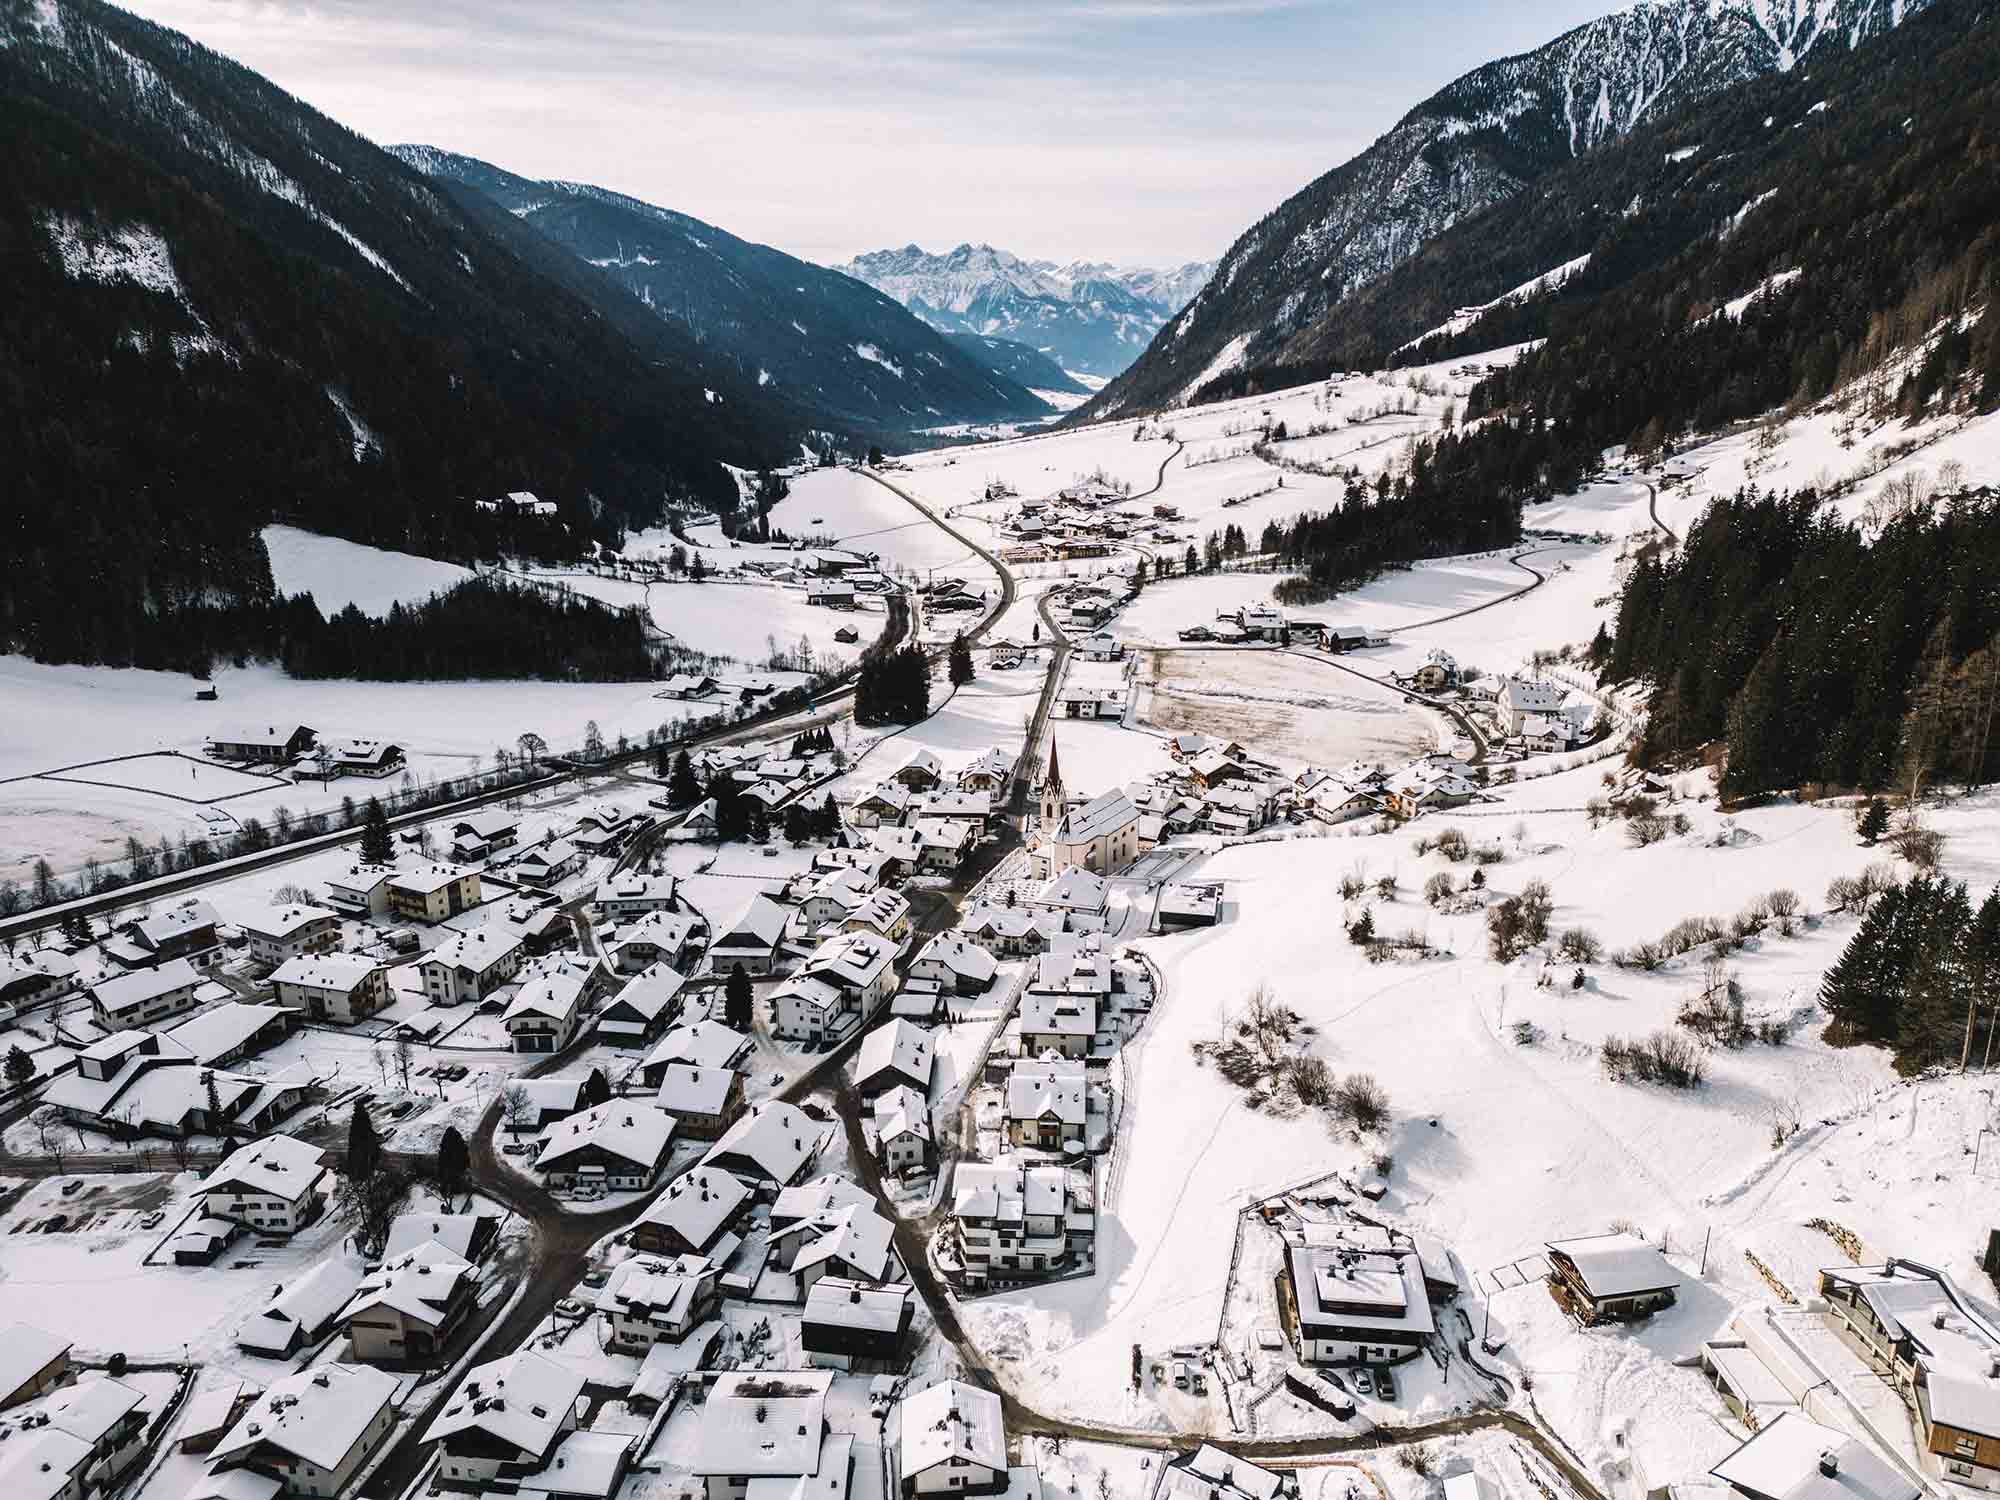 Aerial image of a small inhabited center amidst the snowy mountains in Anterselva